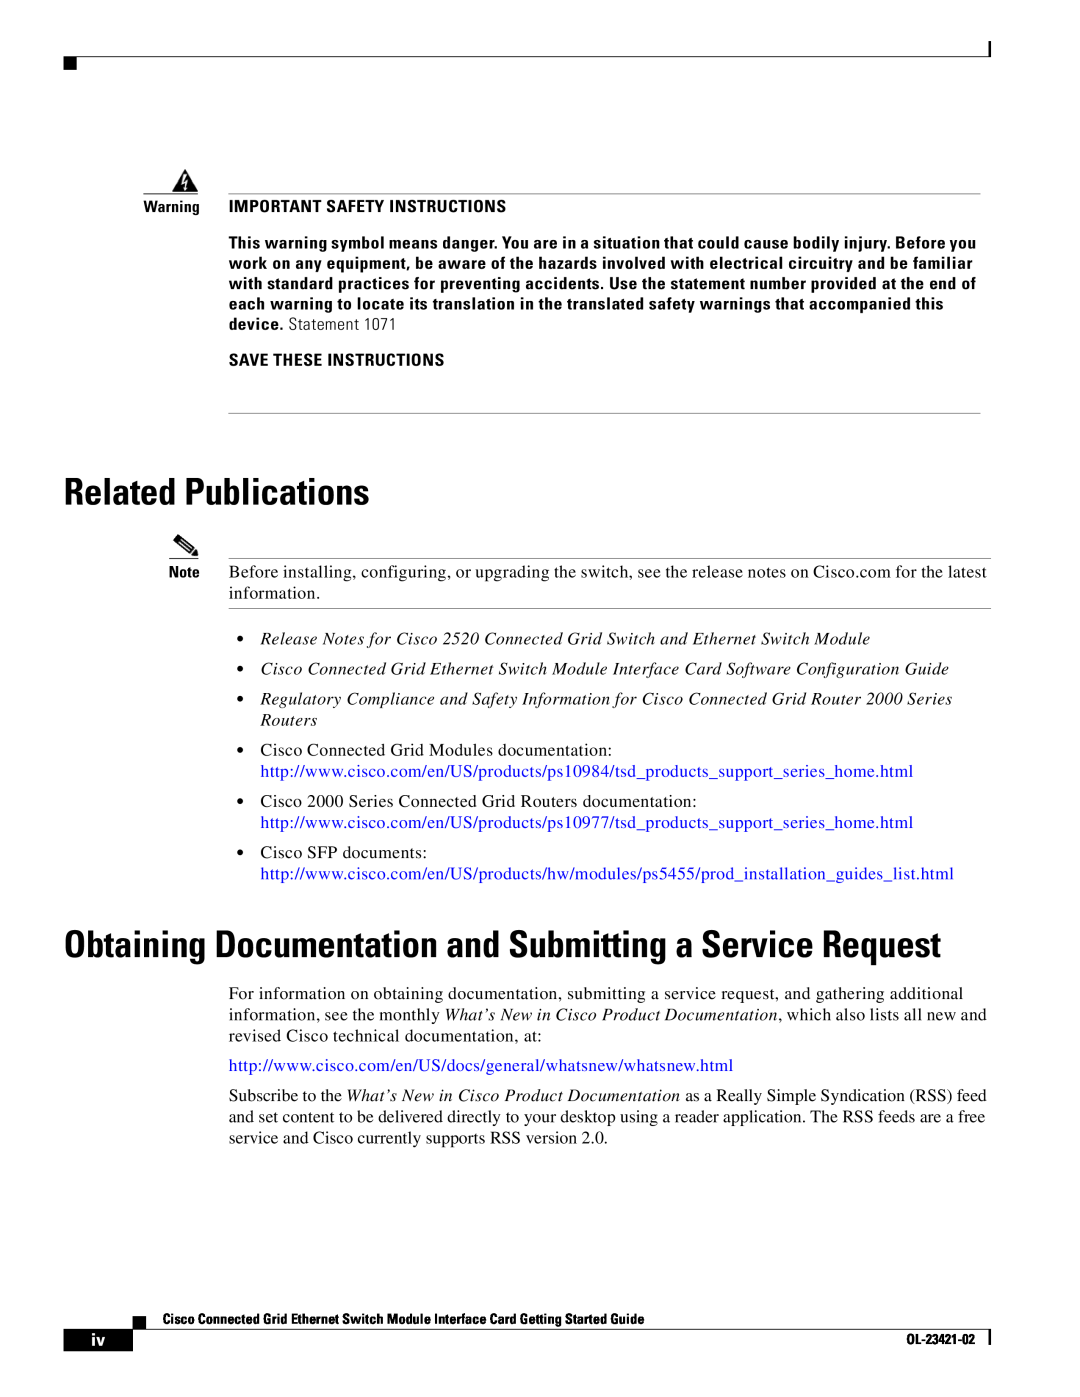 Cisco Systems OL-23421-02 manual Related Publications, Obtaining Documentation and Submitting a Service Request 